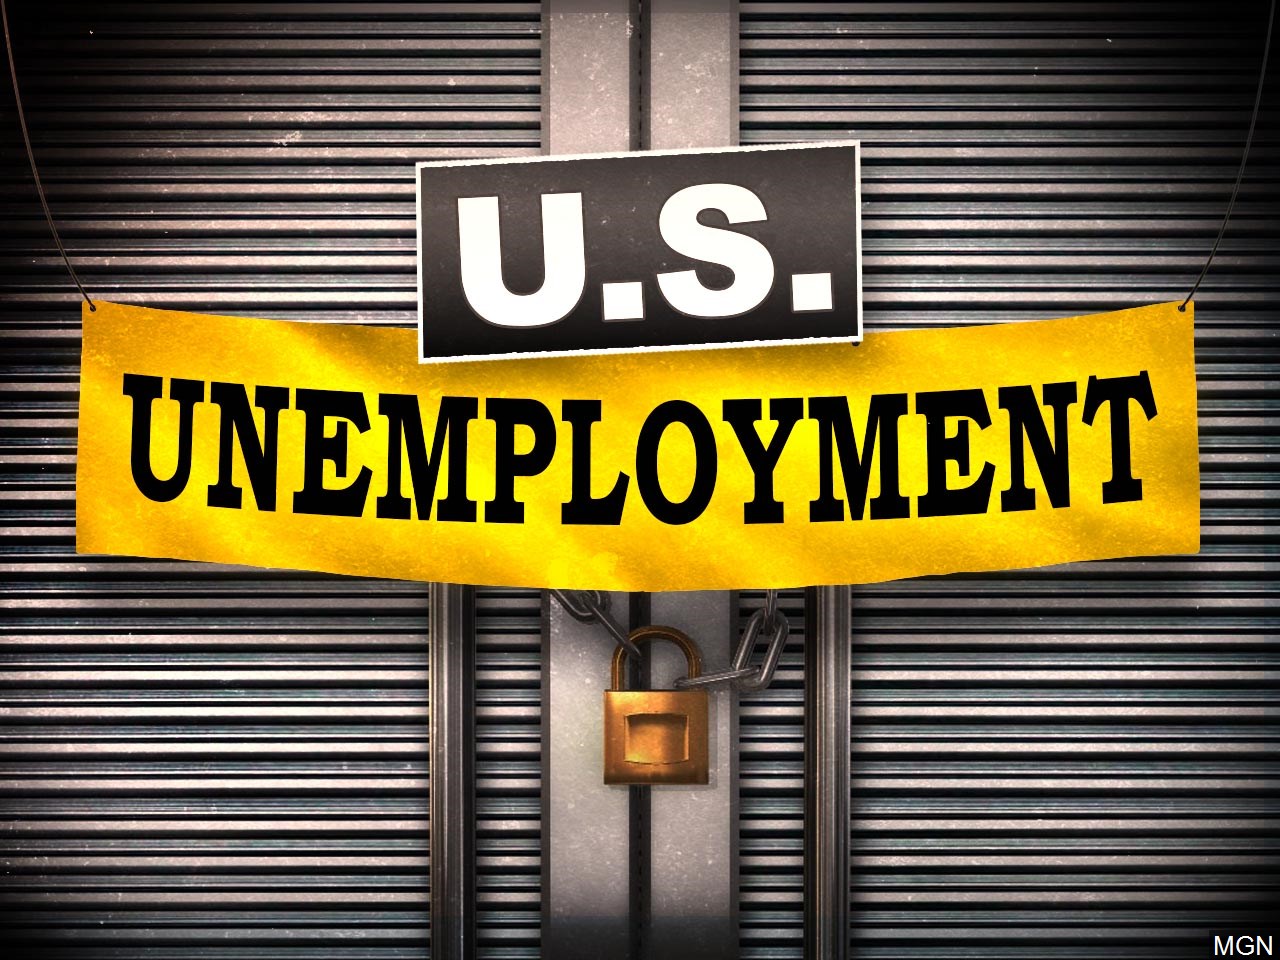 Lars Thoughts: Washington's handling of unemployment claims serves as an example for Oregon ...